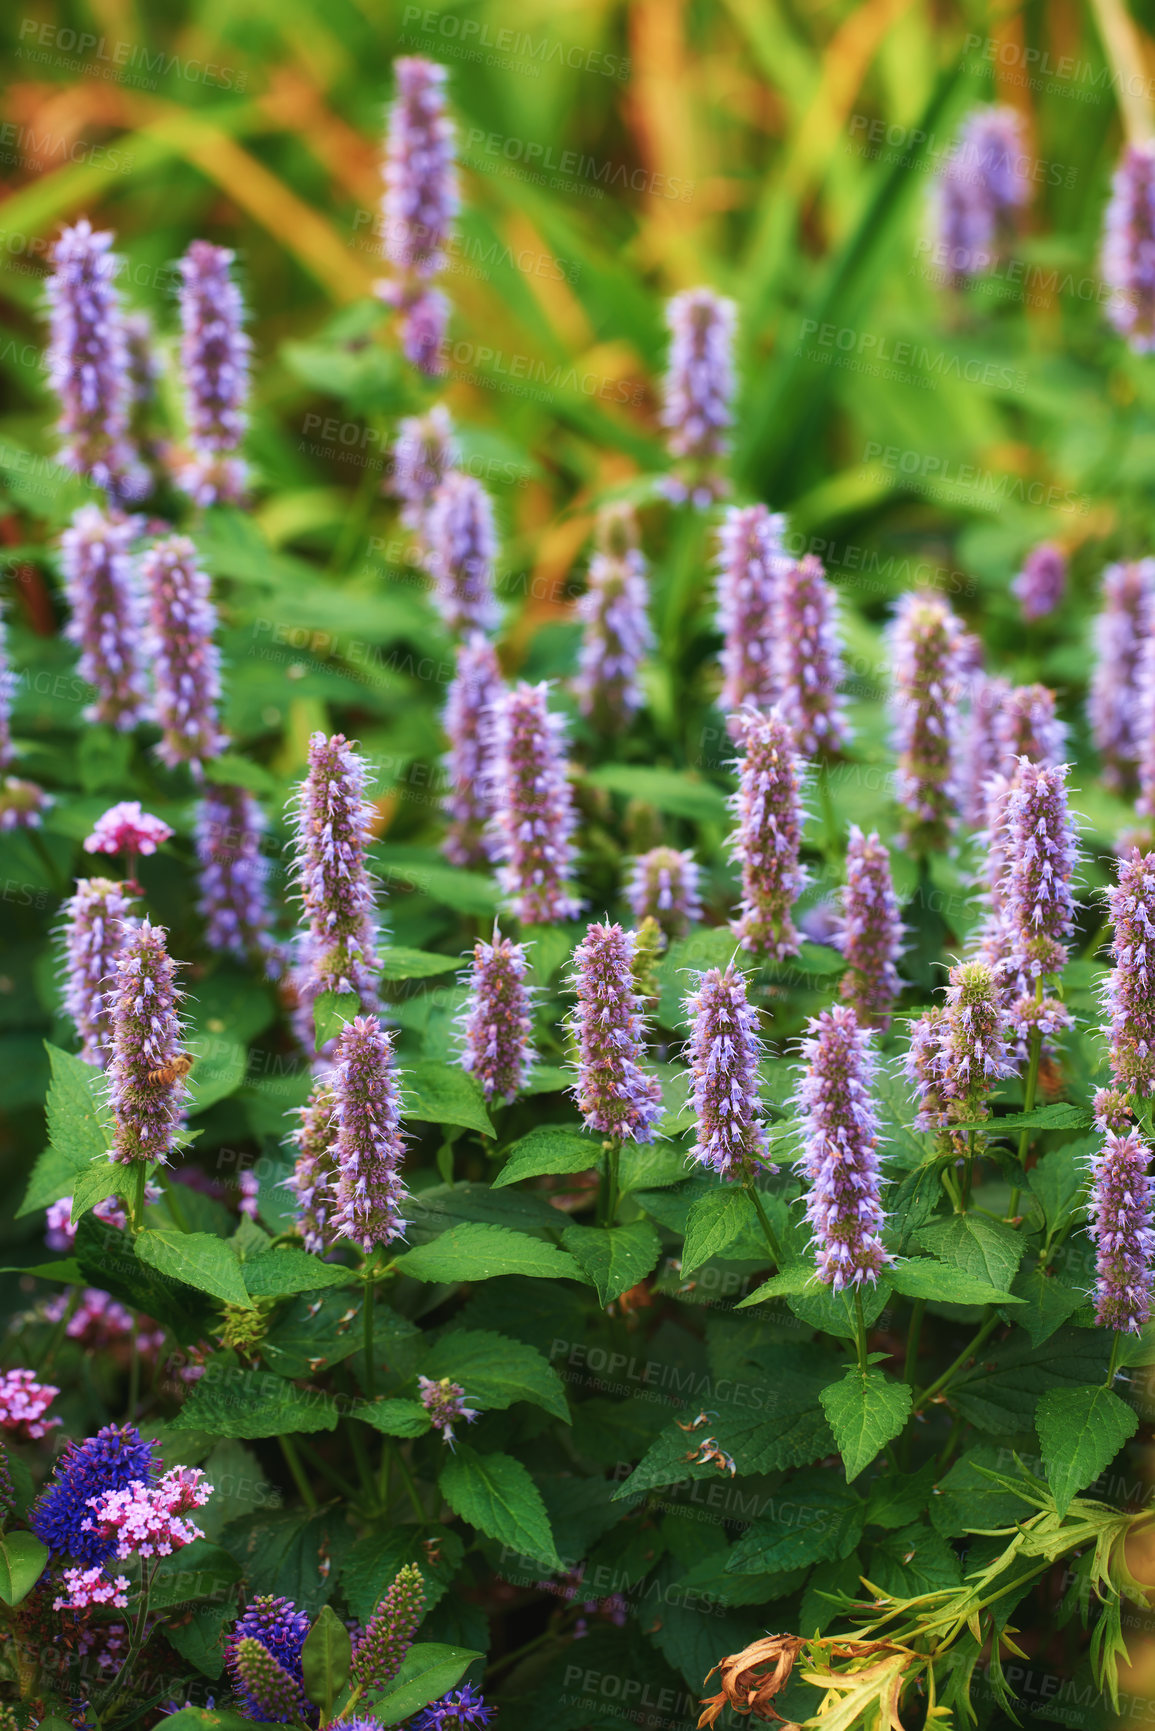 Buy stock photo Beautiful Blue fortune anise hyssop flowers growing in a lush green garden. Bright and vibrant plants bloom outdoors in a backyard or forest.  Botanical park with purple foliage on a summer day